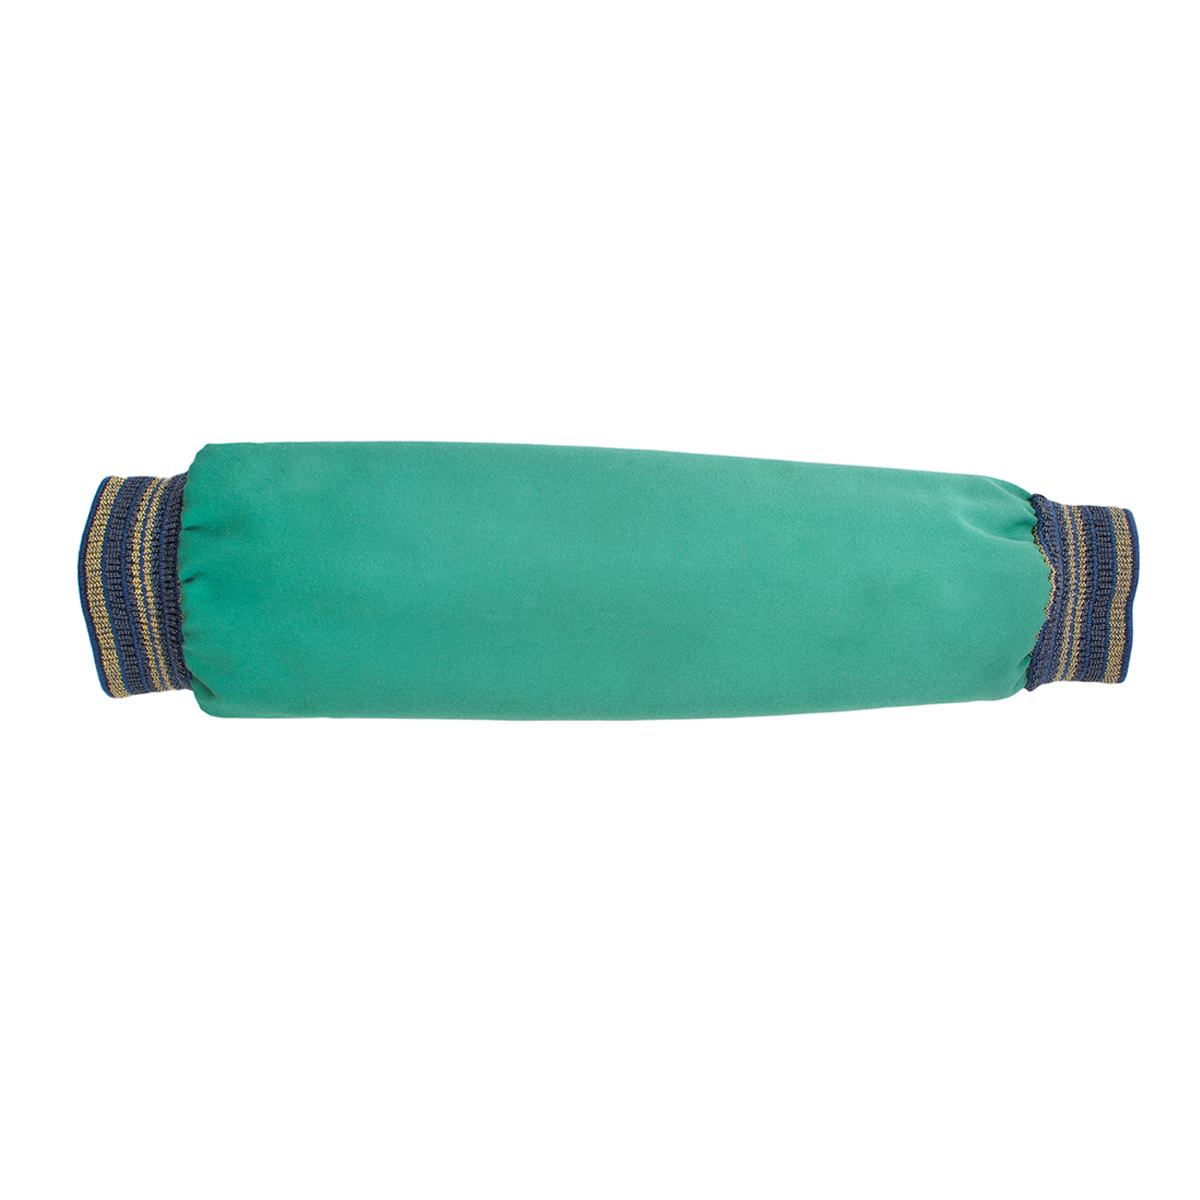 National Safety Apparel Regular Green FR Green Sateen Flame Resistant Welding Sleeve With Blue Elastic On Both Ends